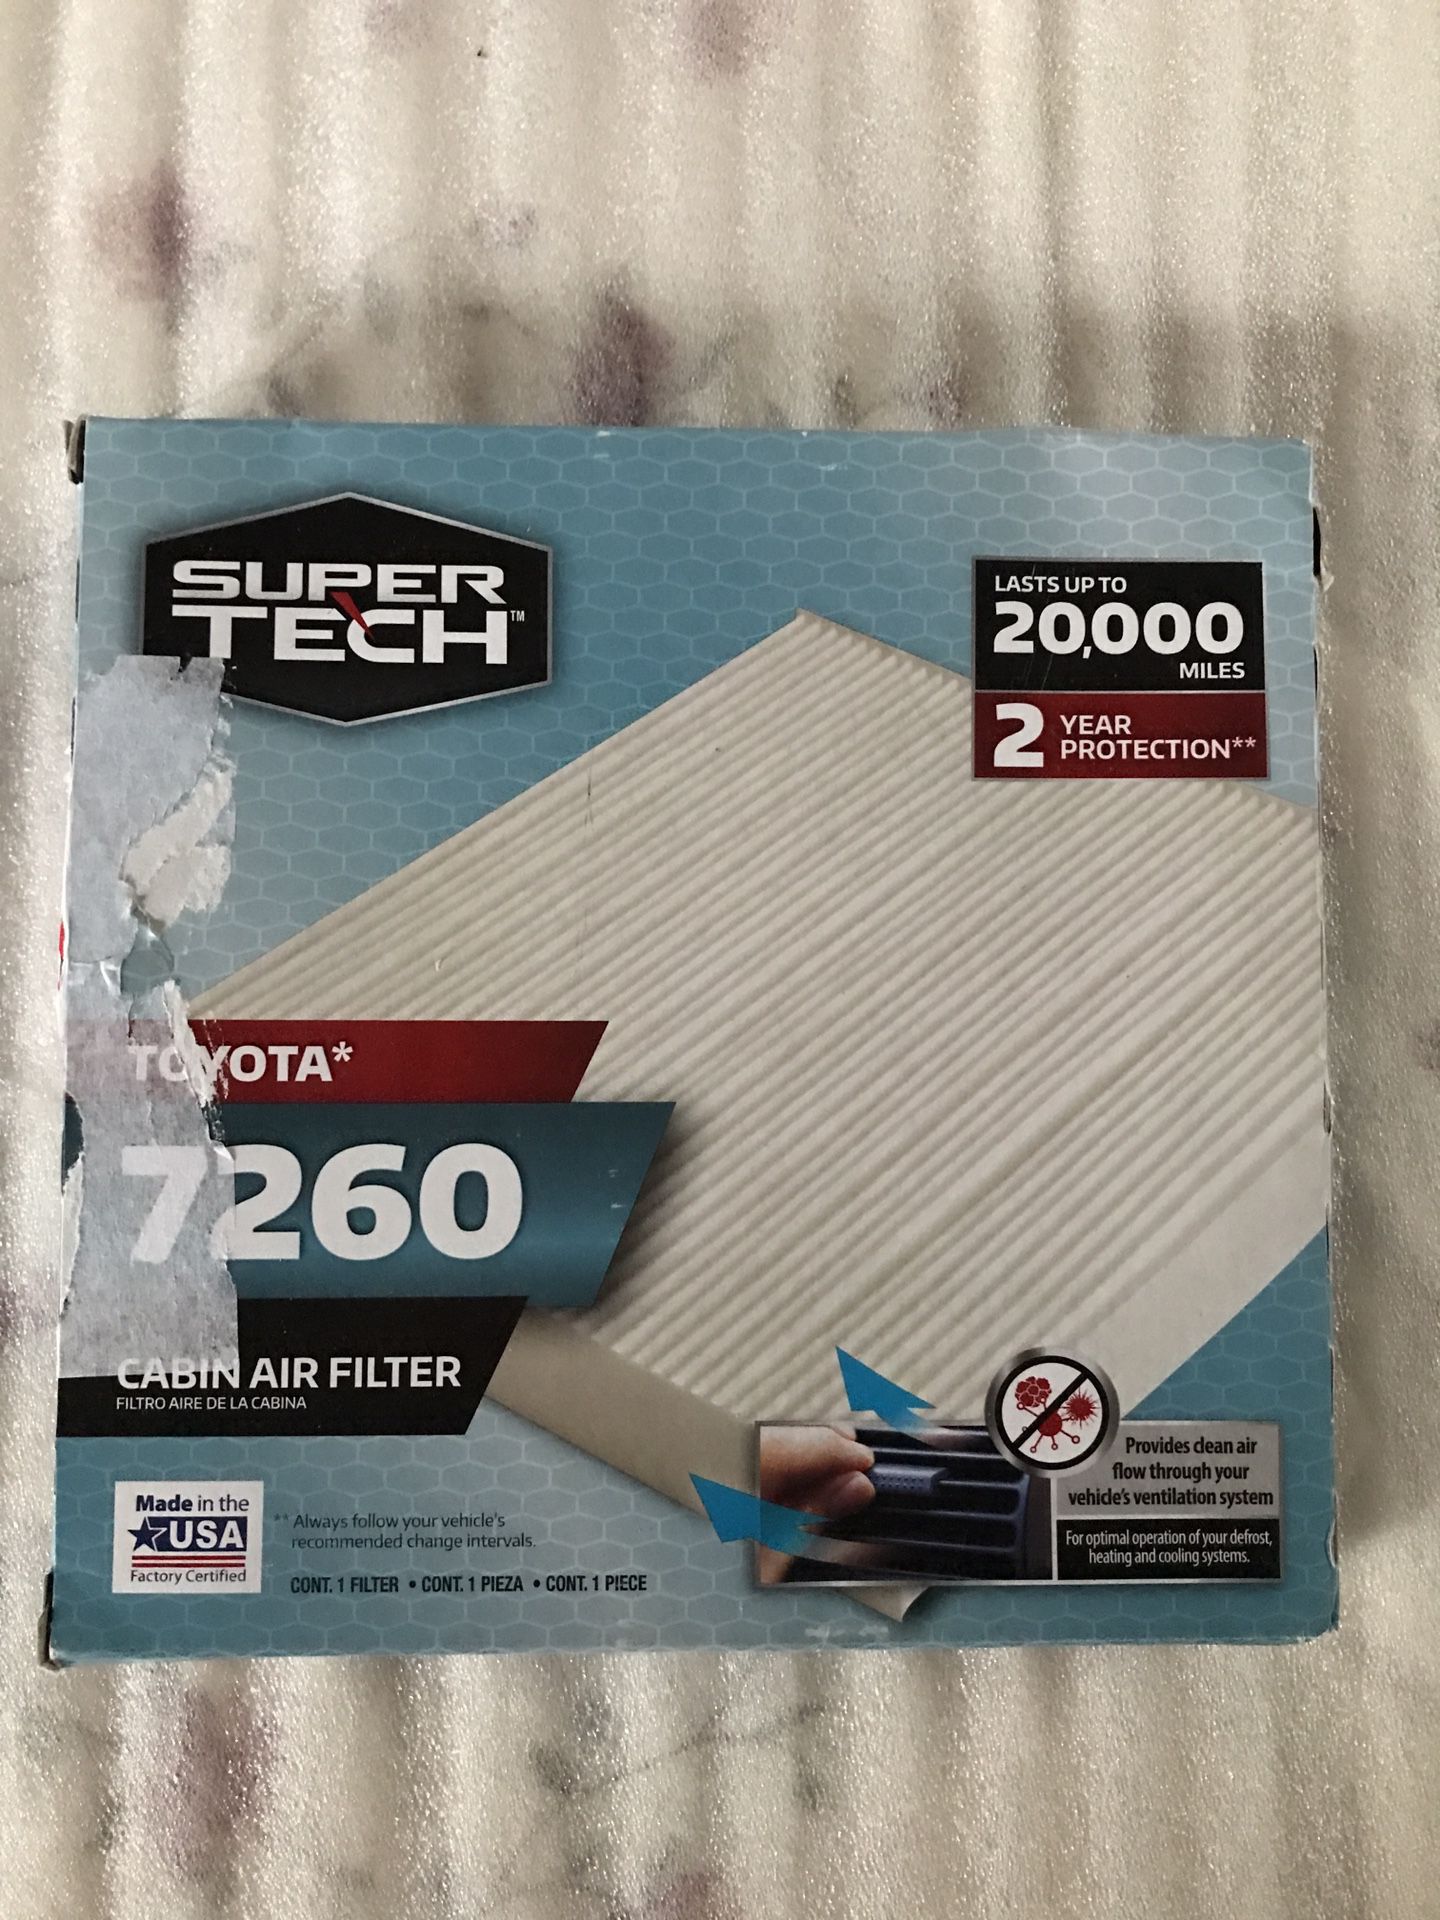 SuperTech 7260 Replacement Air/Dust Filter for Toyota Cabin Air Filter